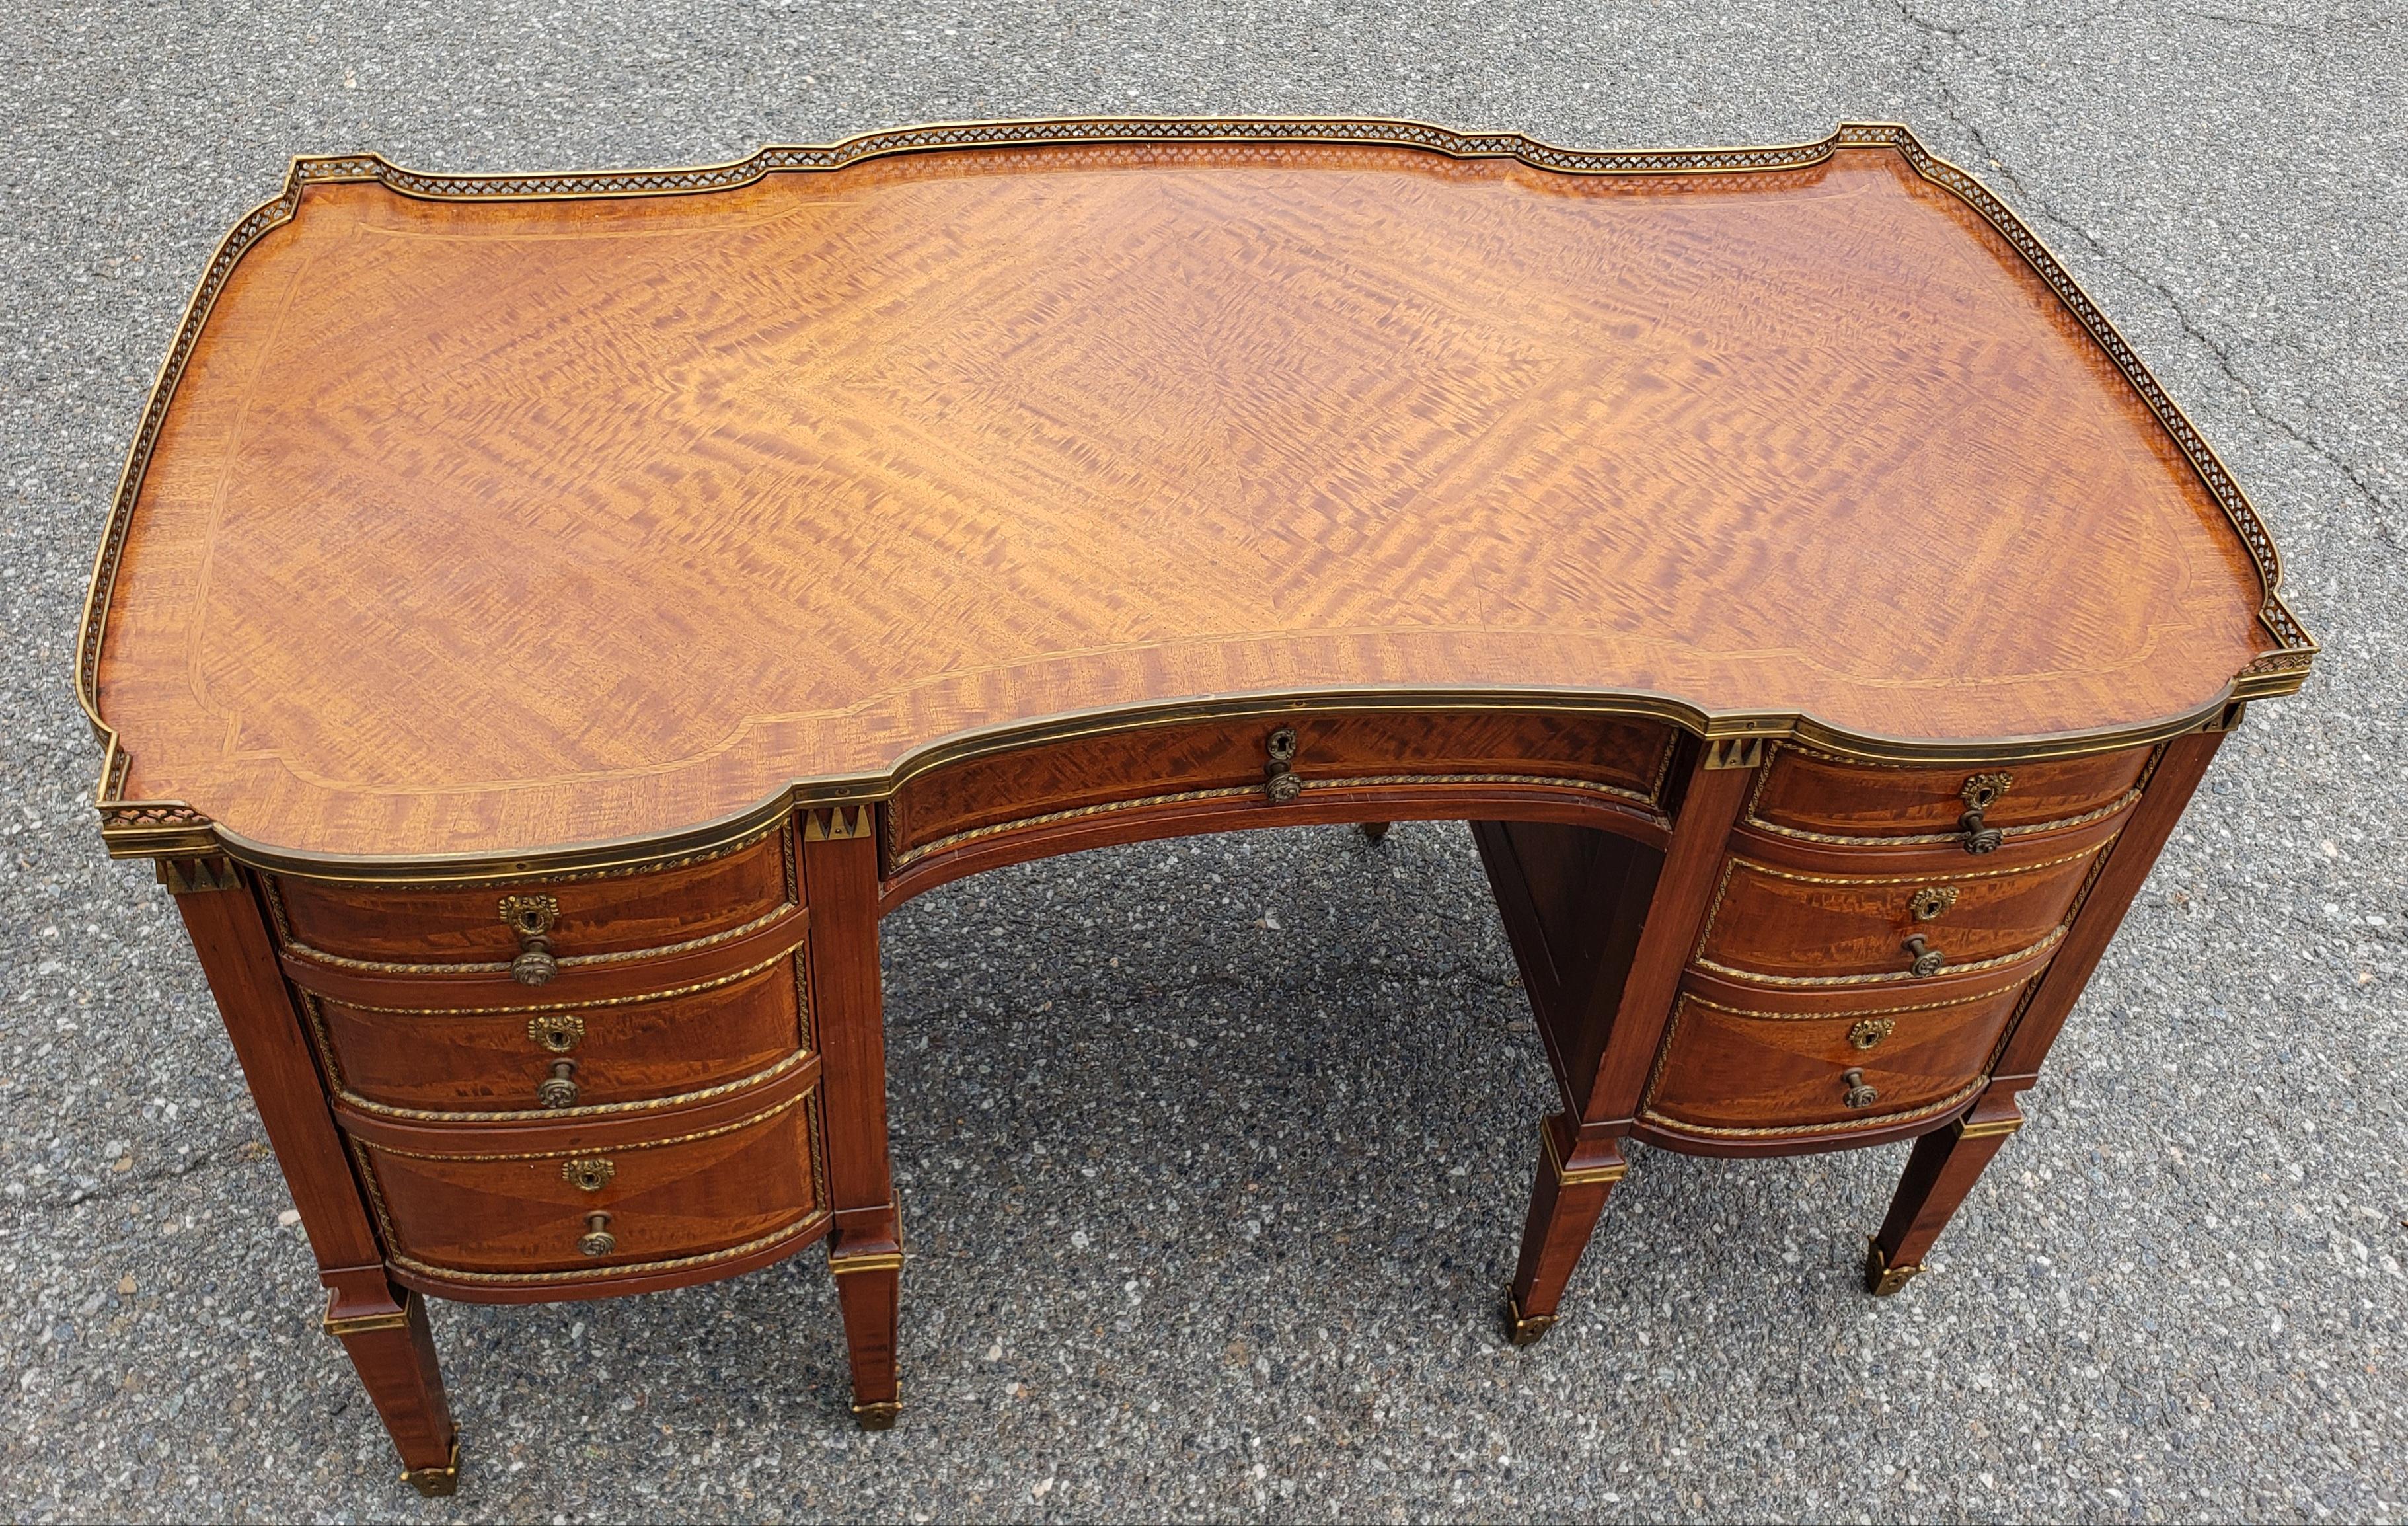 Louis XVI Style Ormolu Mounted Galleried Mahogany Burl and Marquetry Desk  For Sale 1